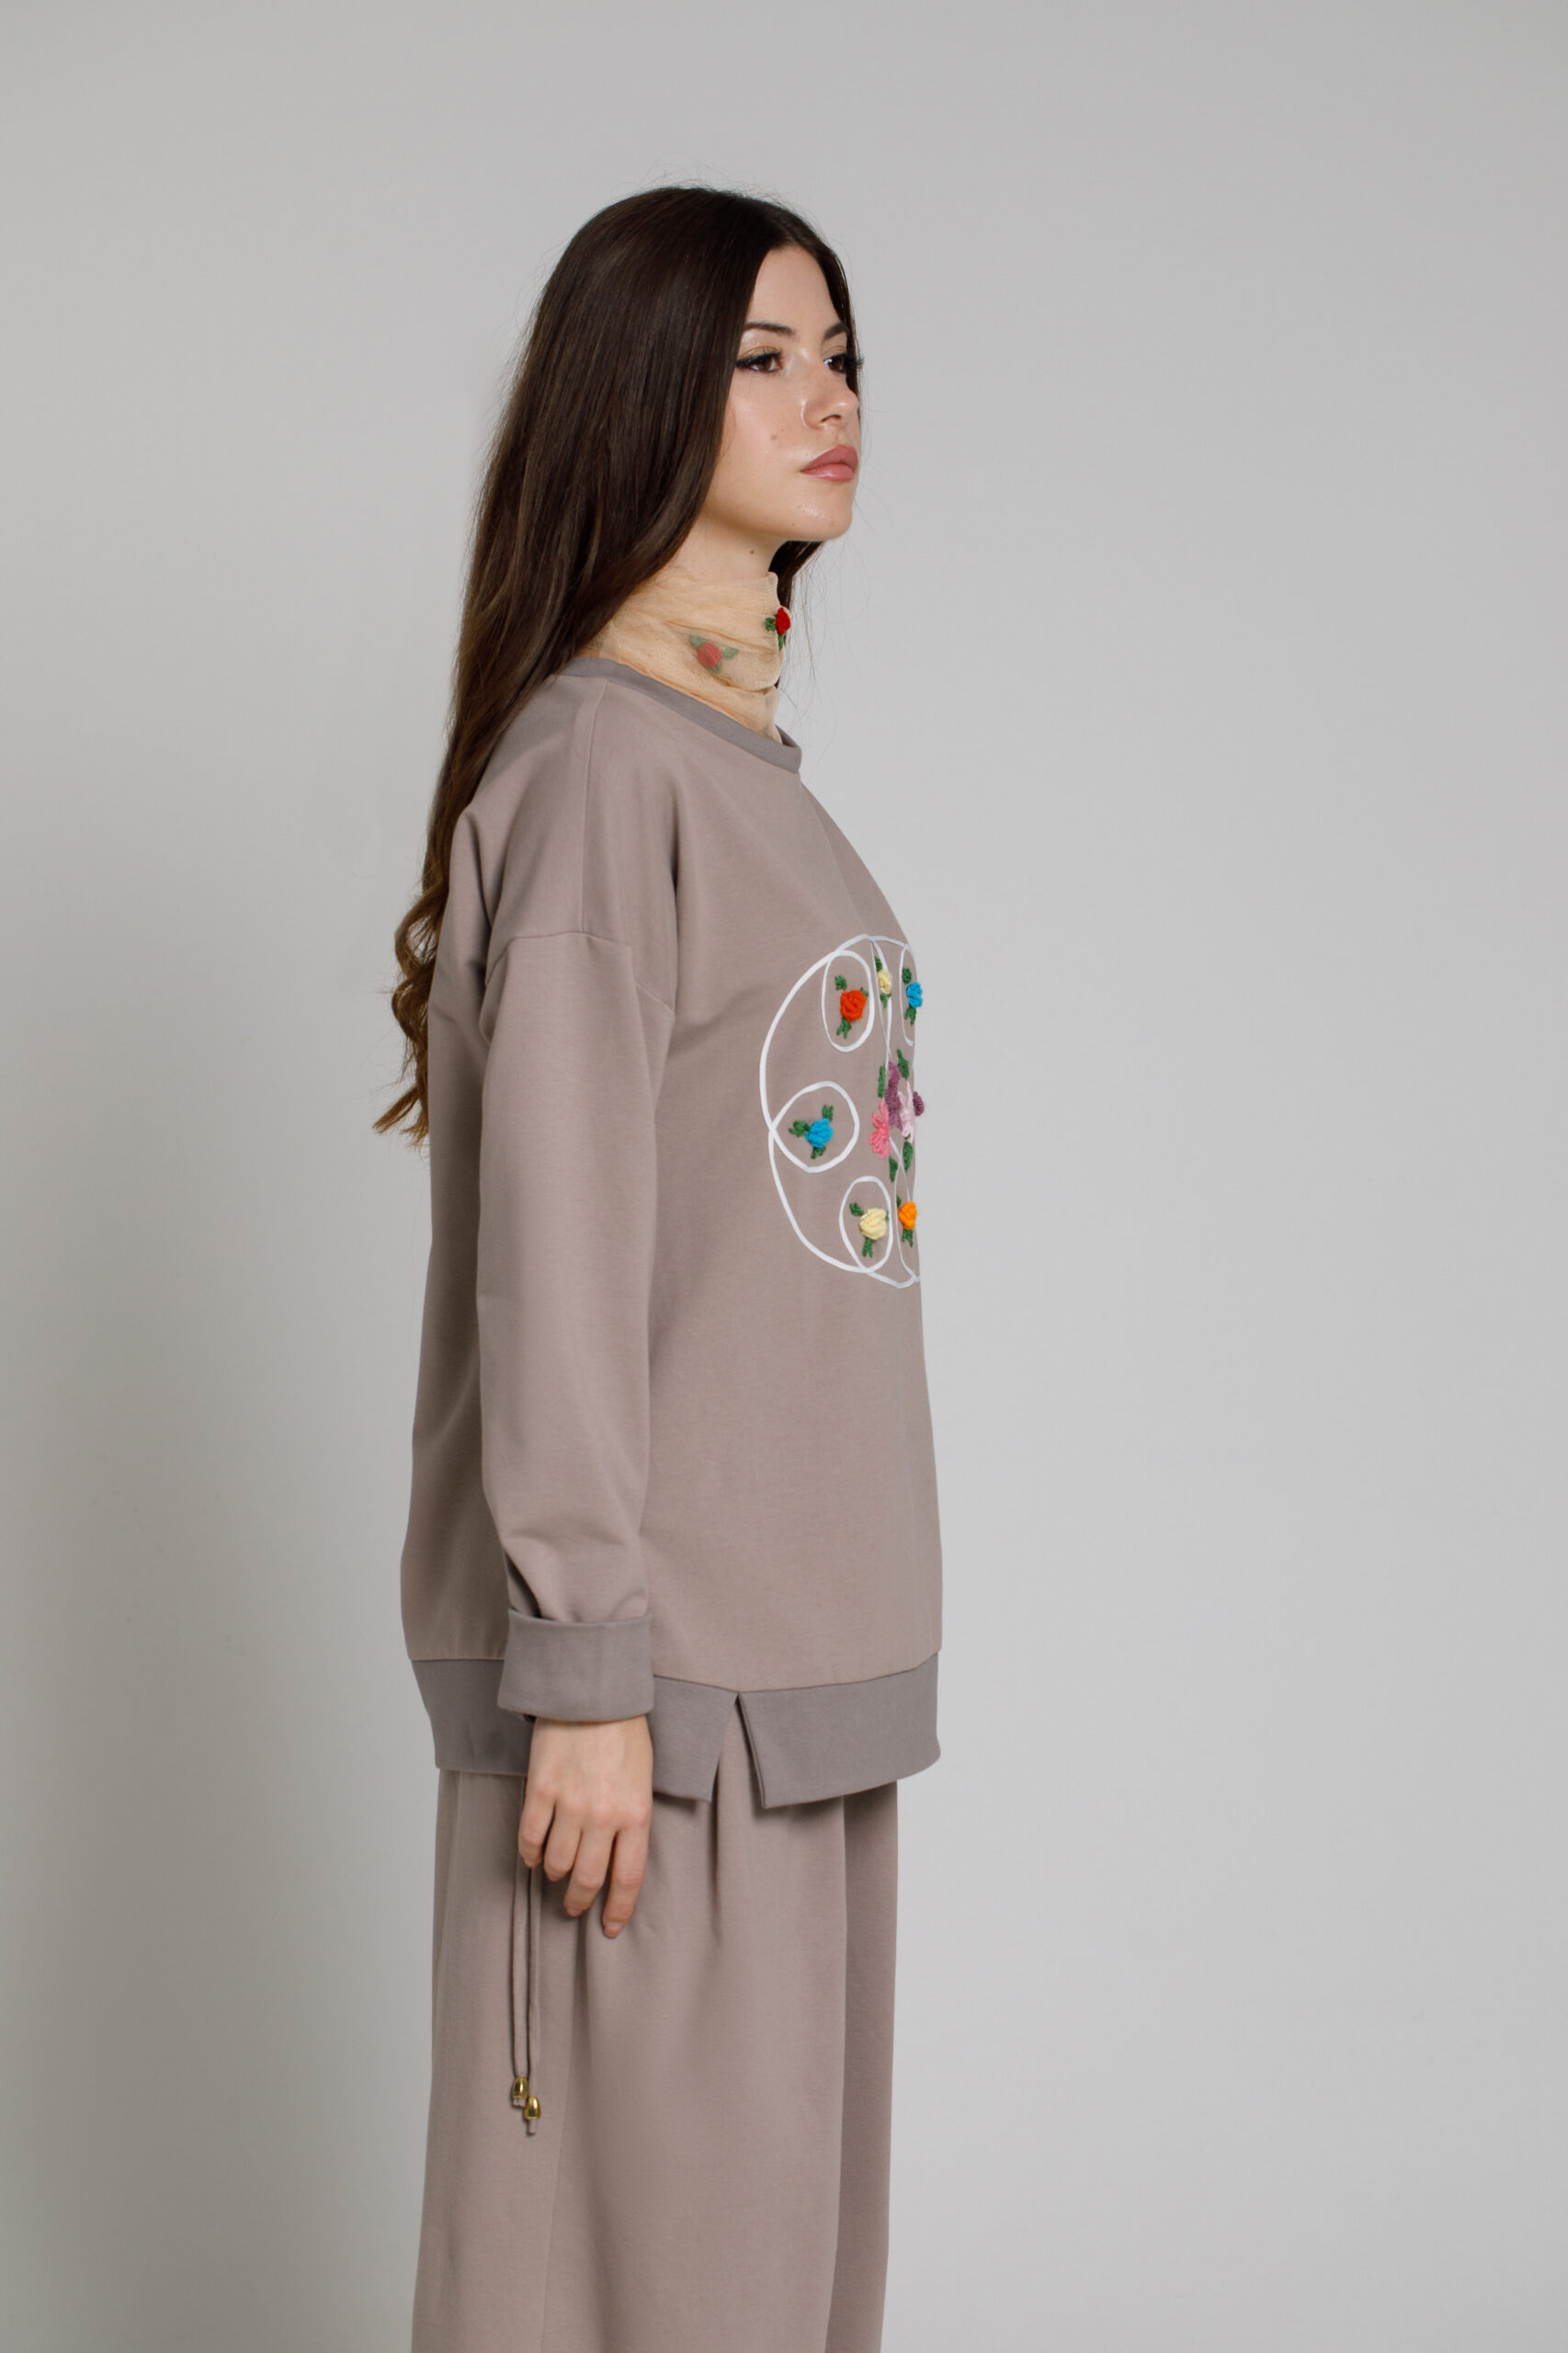 Beige IANY blouse with floral embroidery. Natural fabrics, original design, handmade embroidery